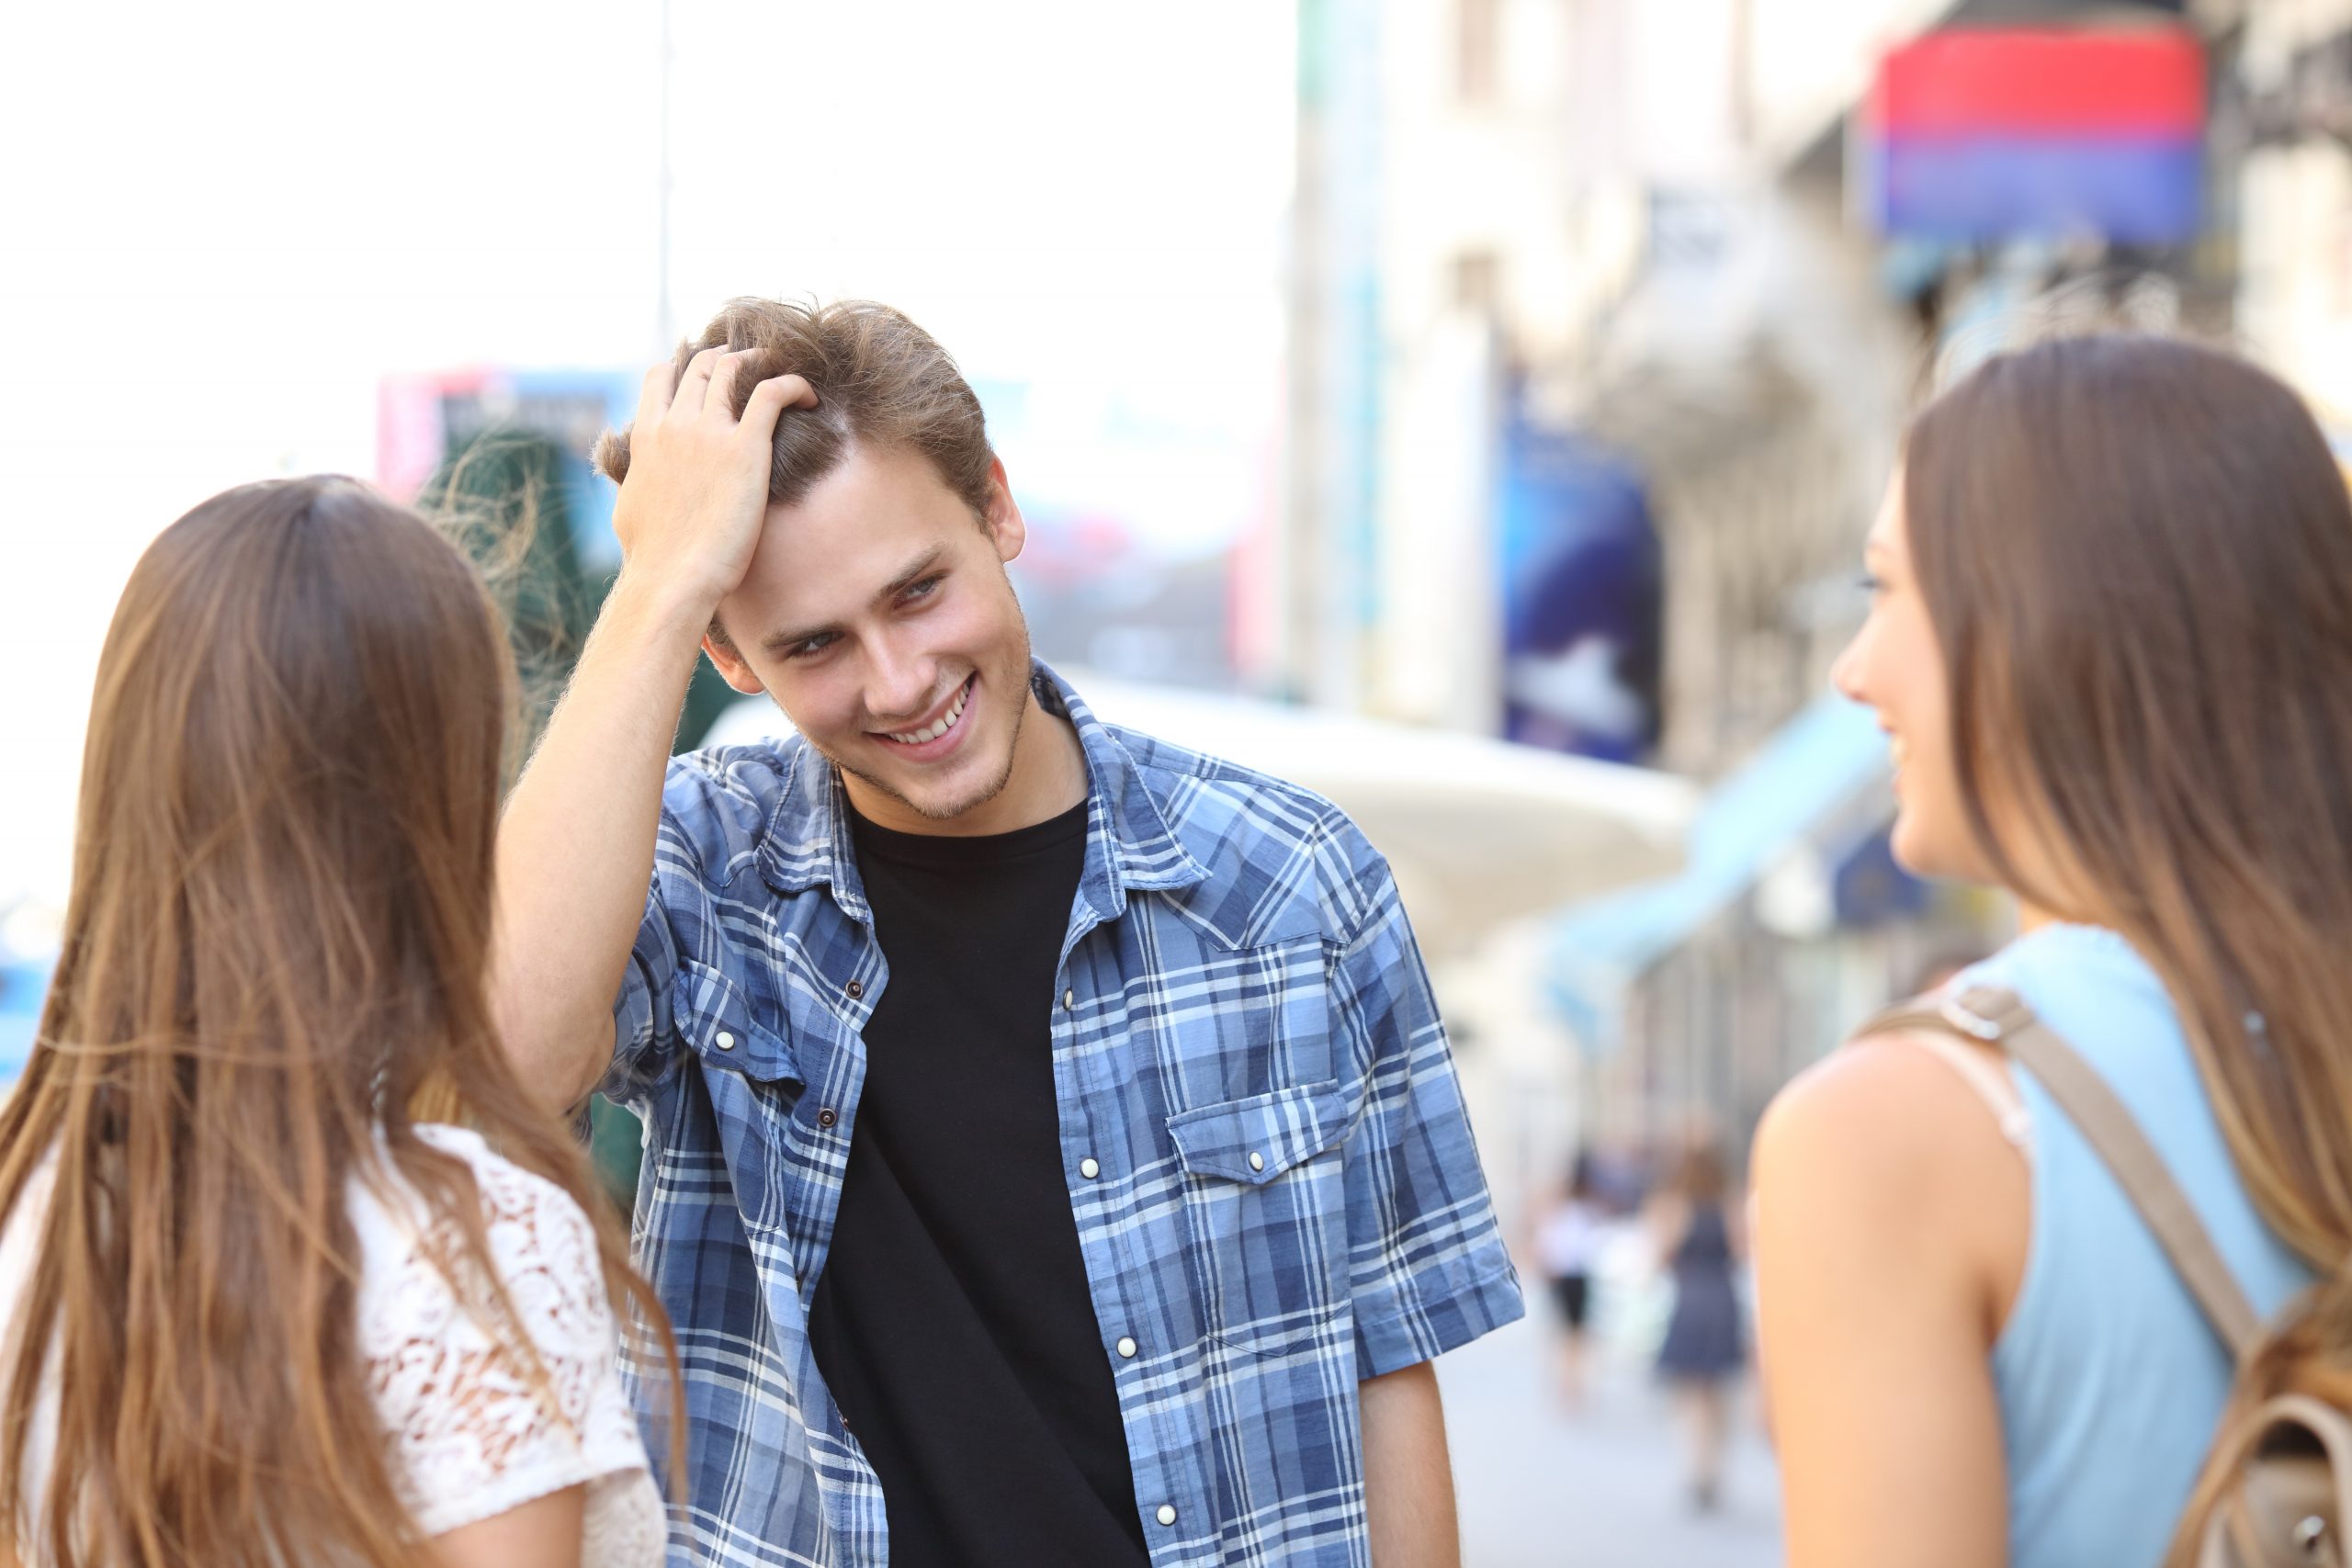 A Young Man Trying To Become A Master At Talking To Strangers